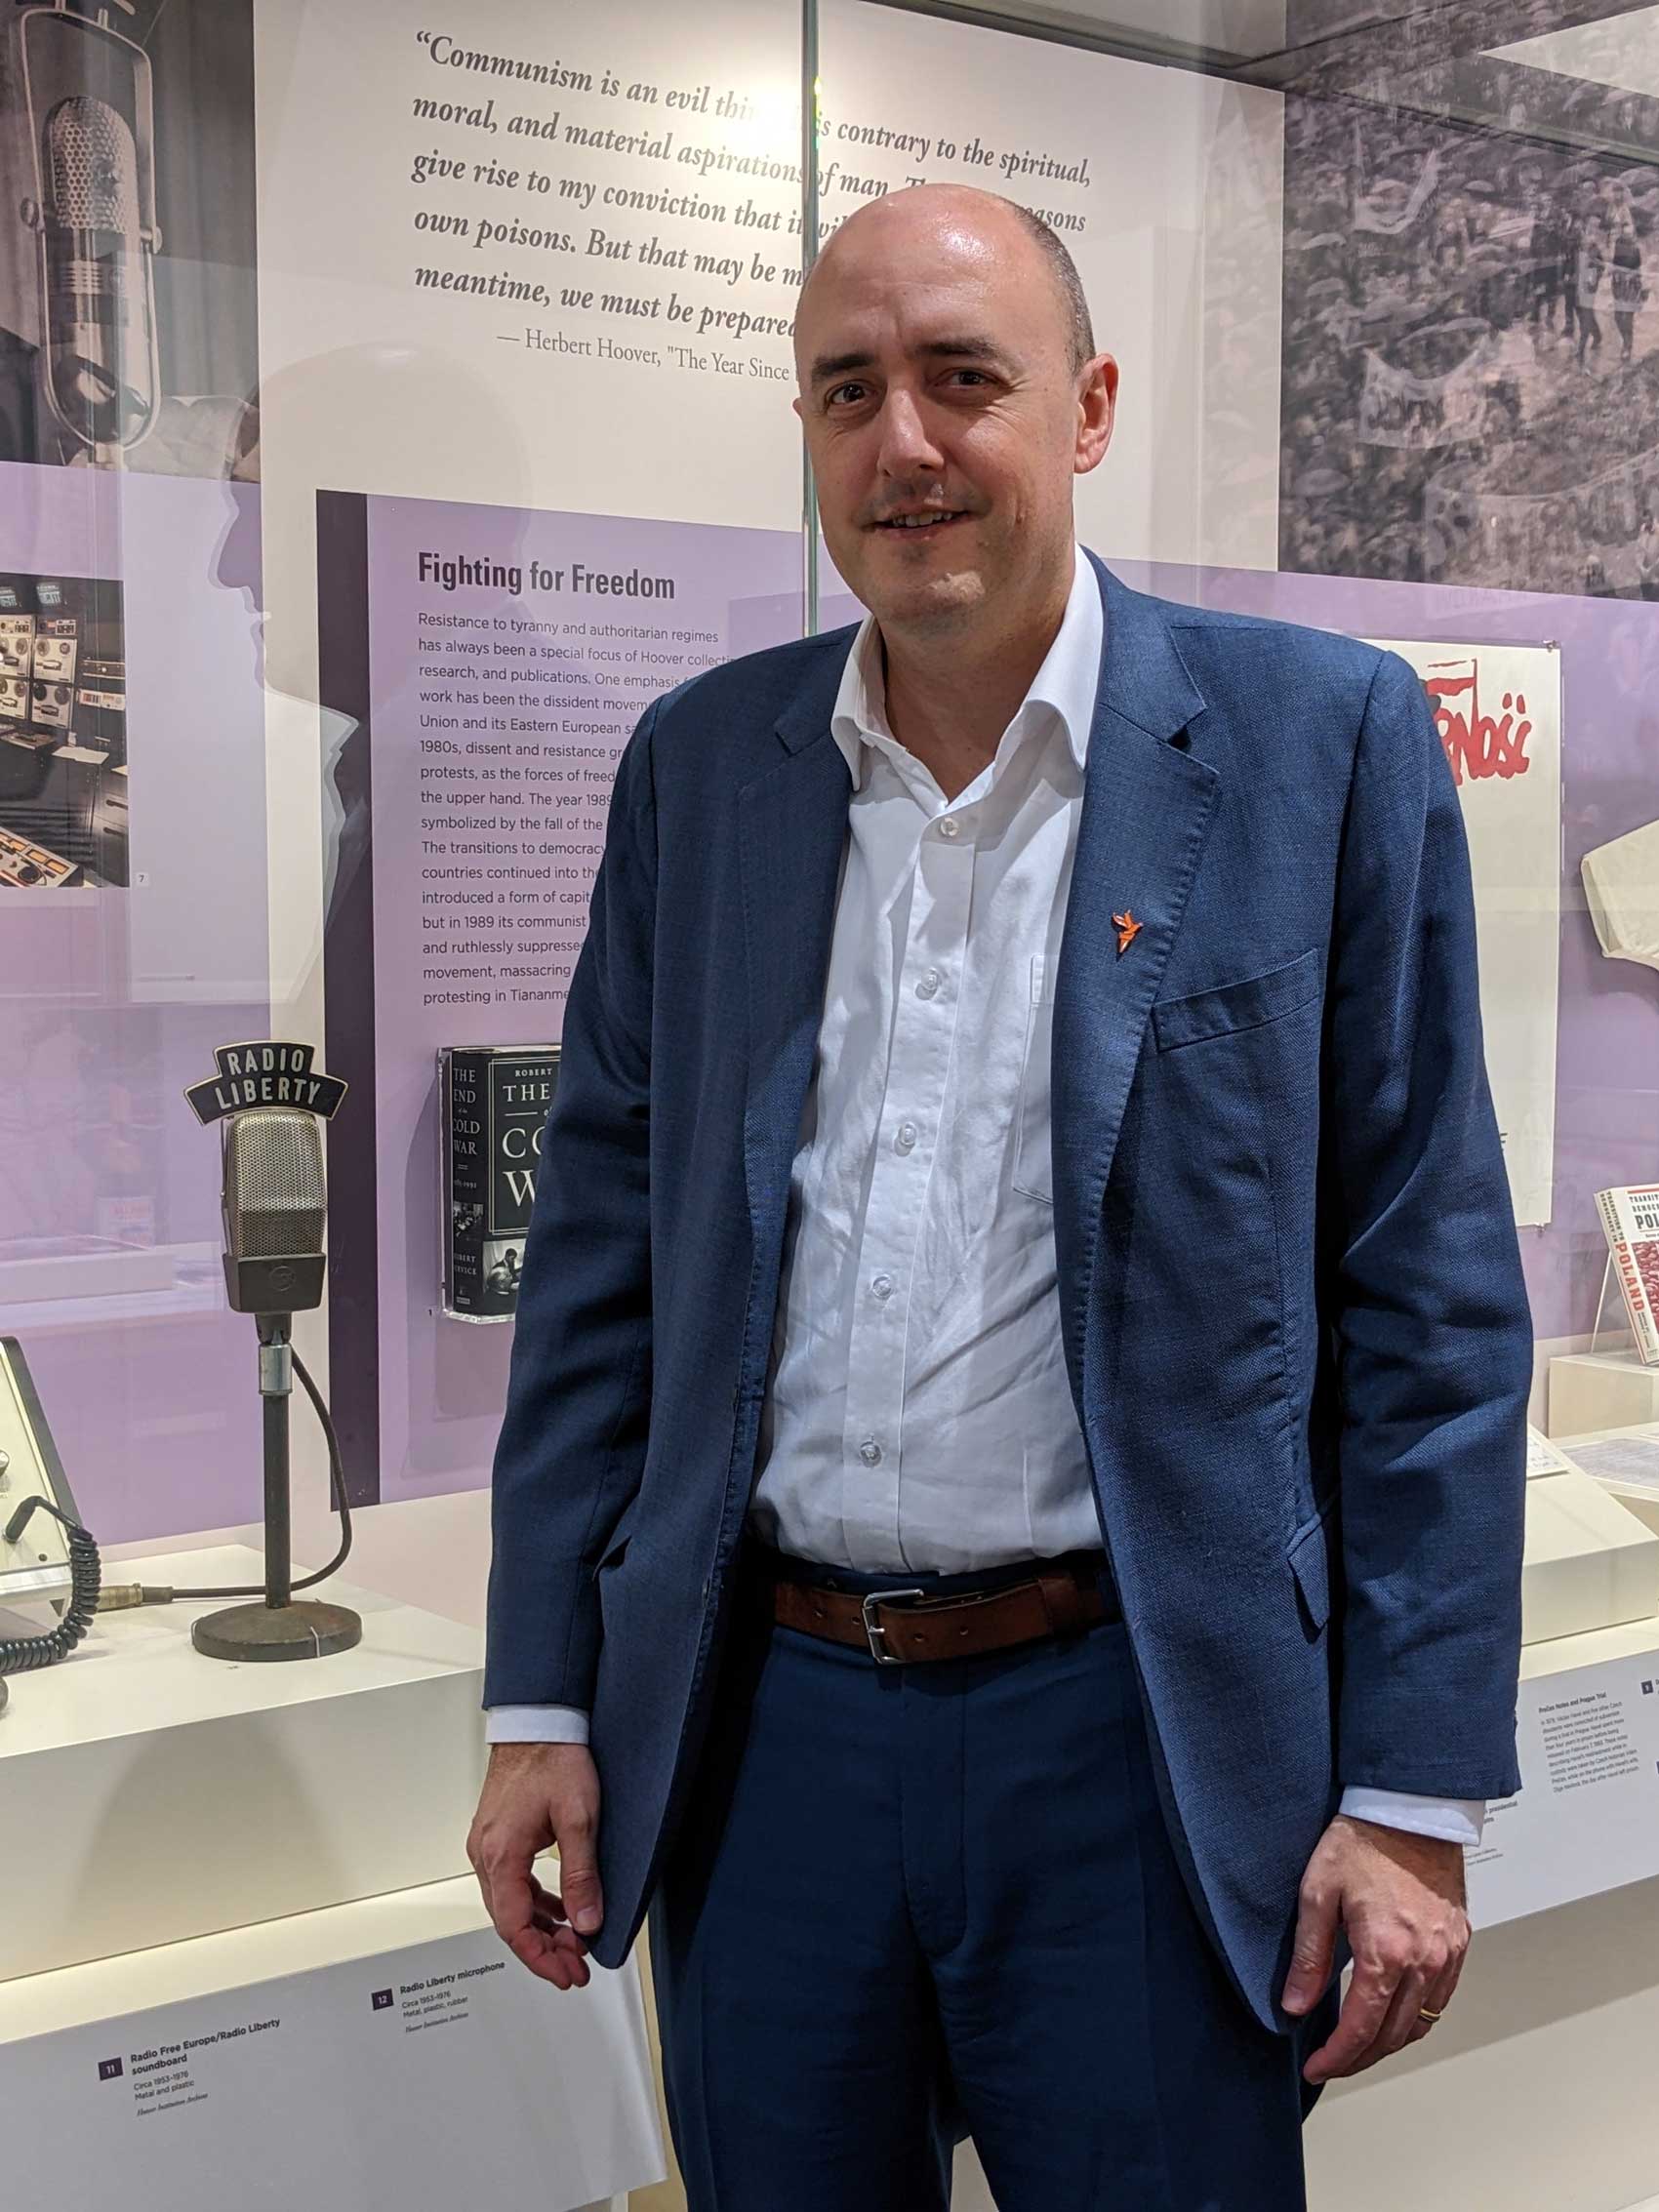 Jamie Fly, president of Radio Free Europe/Radio Liberty visiting Hoover Tower gallery stands next to RFE/FL microphone